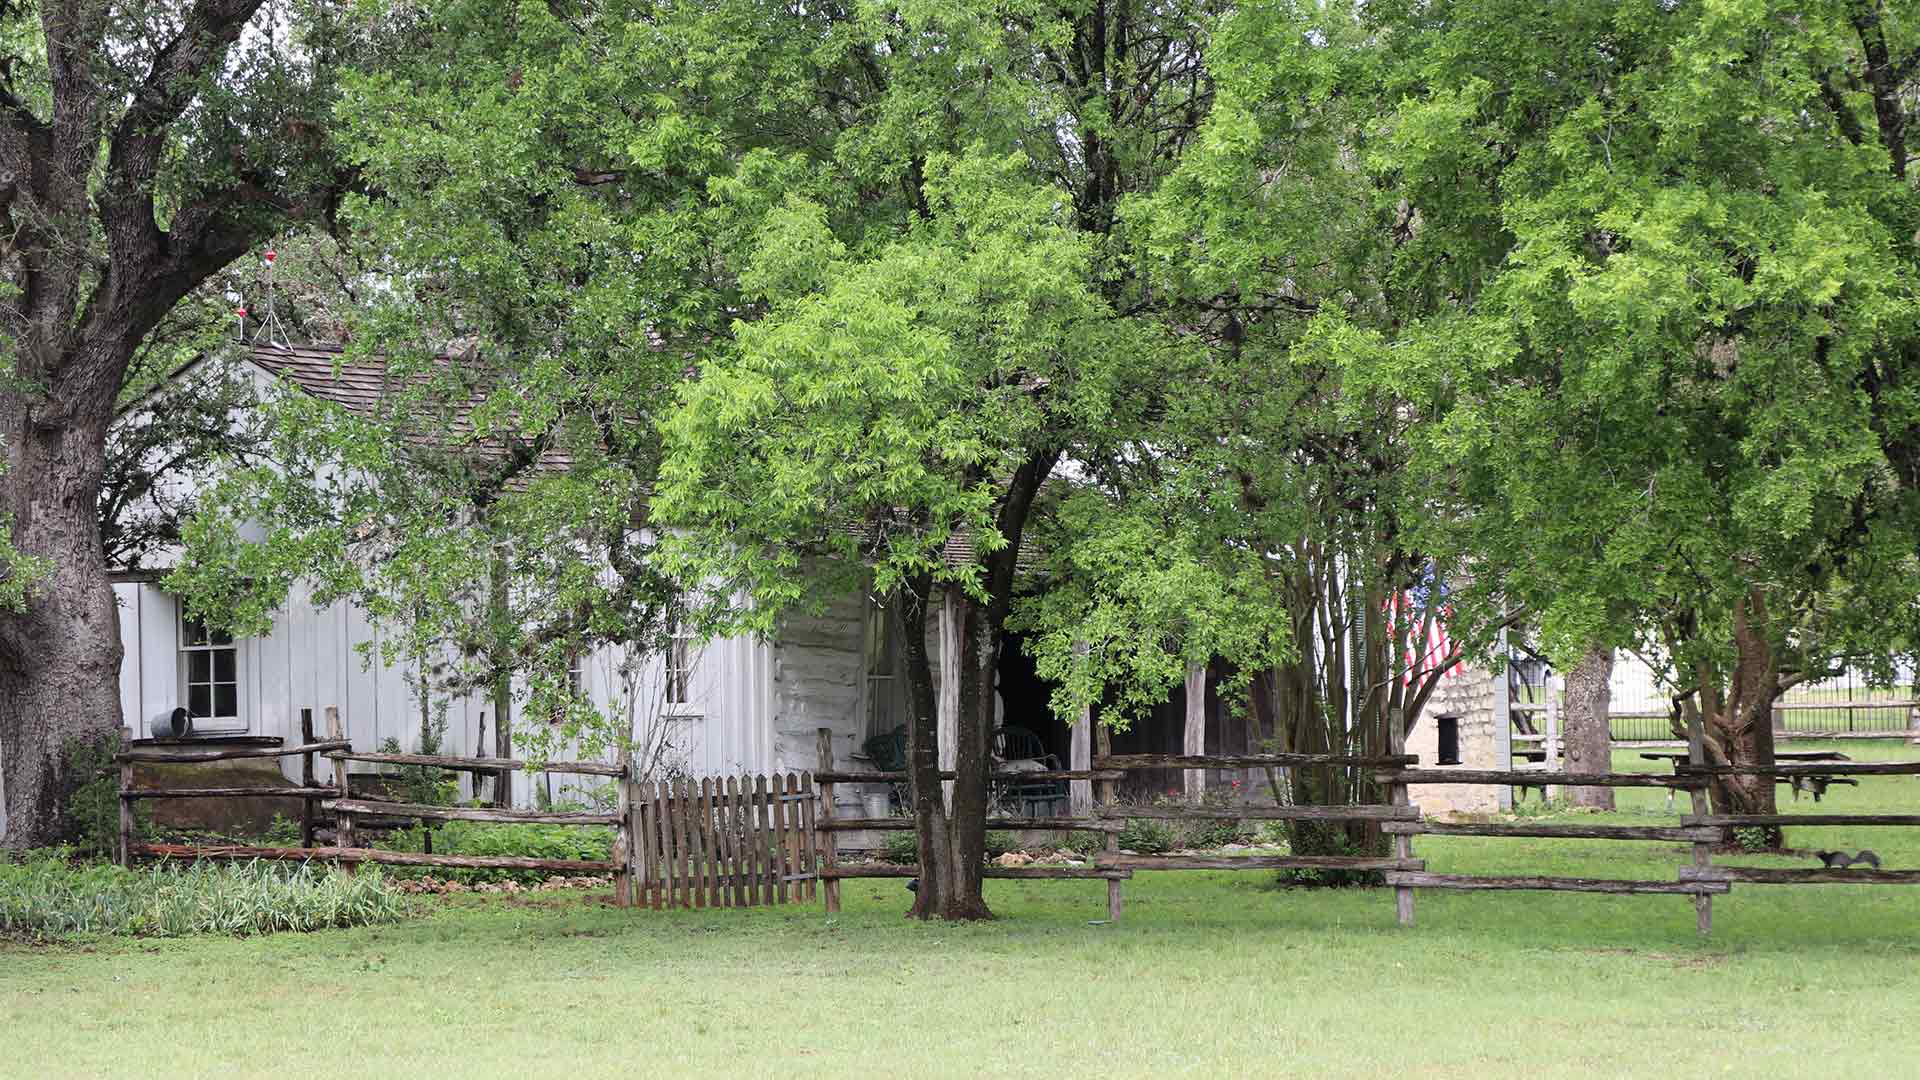 Old farmhouse and large trees outside Dripping Springs, TX.